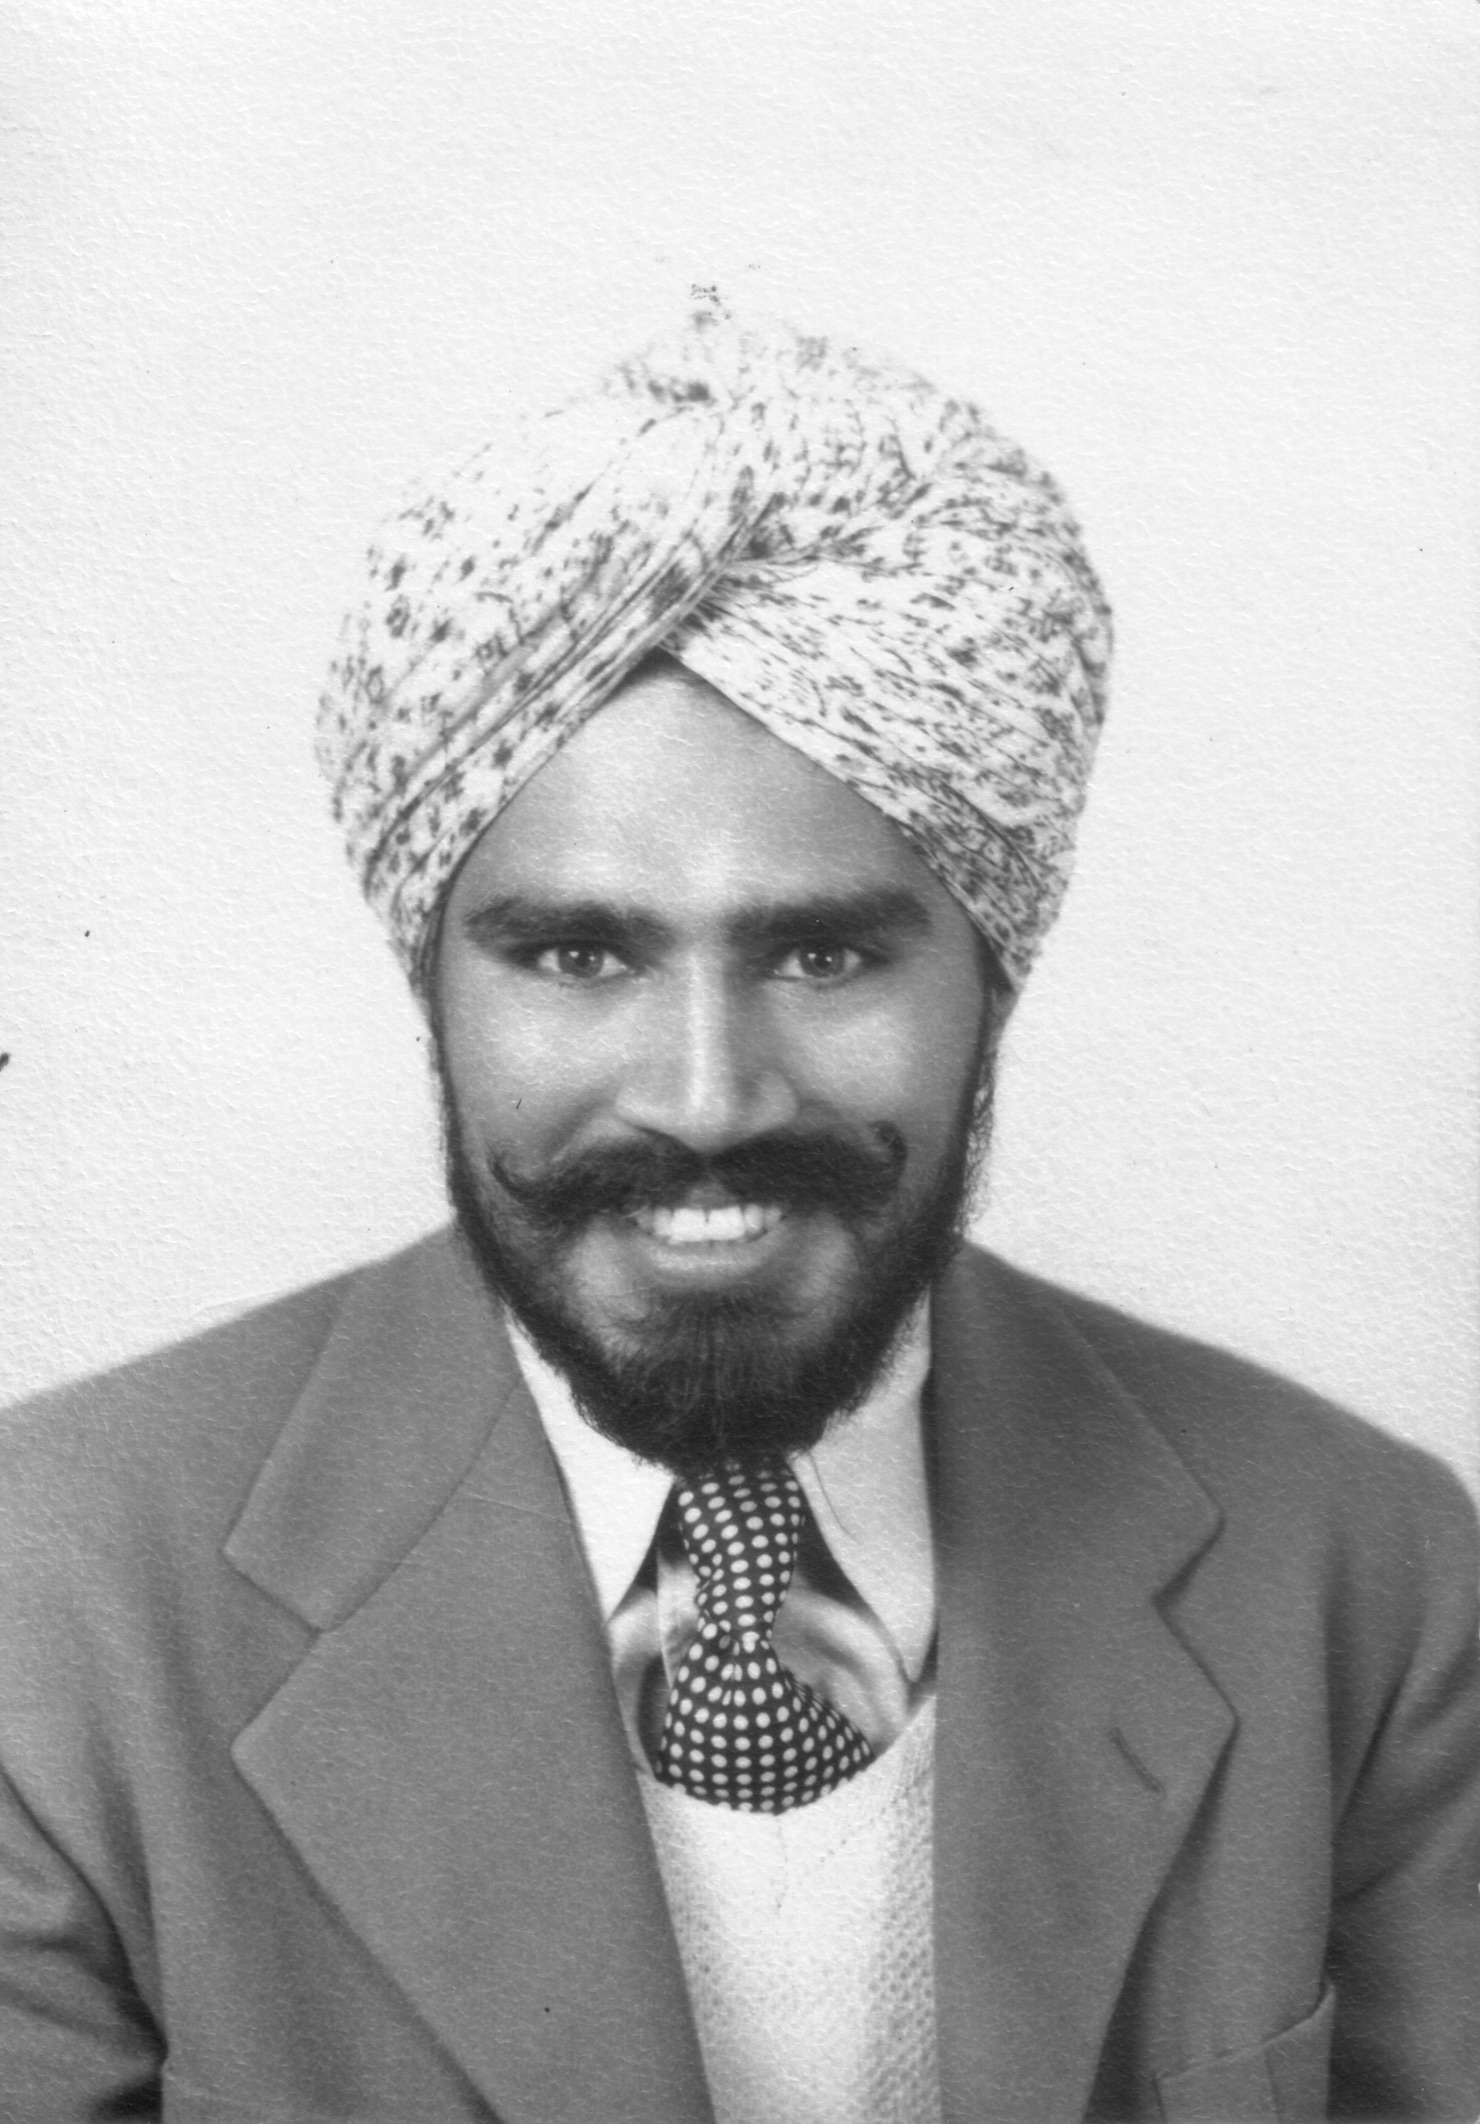 dr johl with turban copy